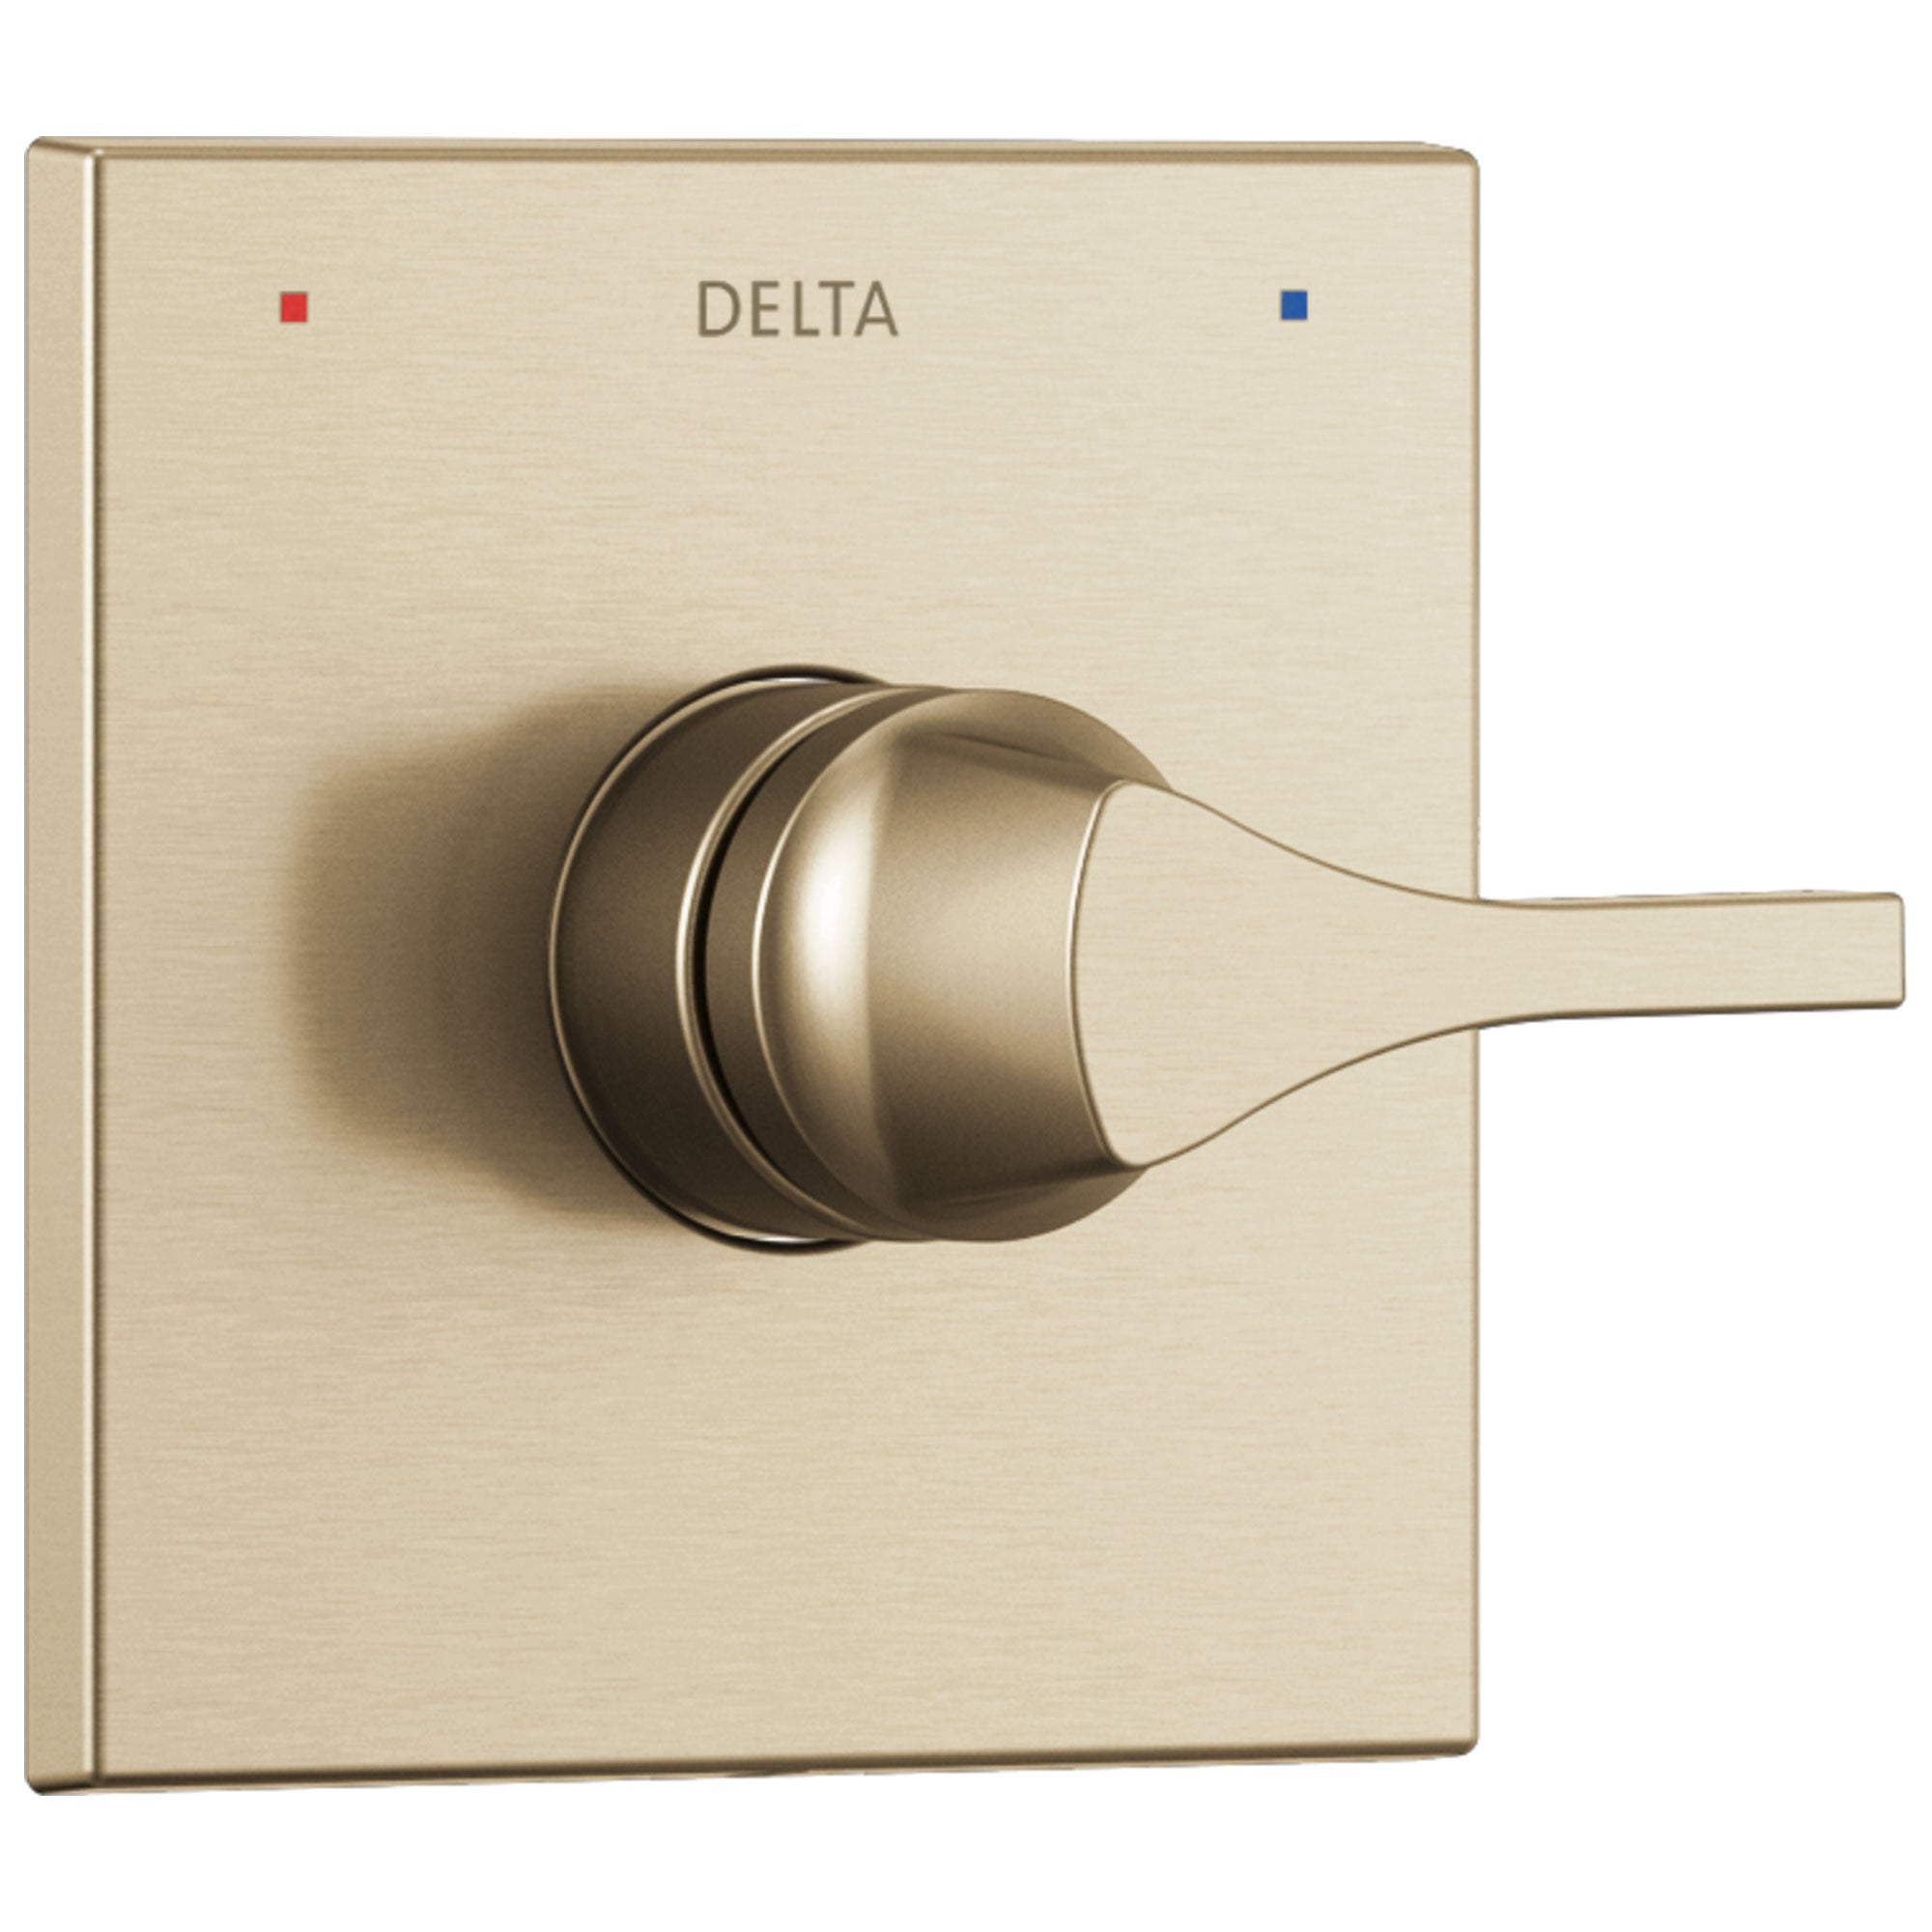 Delta Zura Champagne Bronze Finish Monitor 14 Series Shower Faucet Control Only Includes Handle, Cartridge, and Valve without Stops D3642V